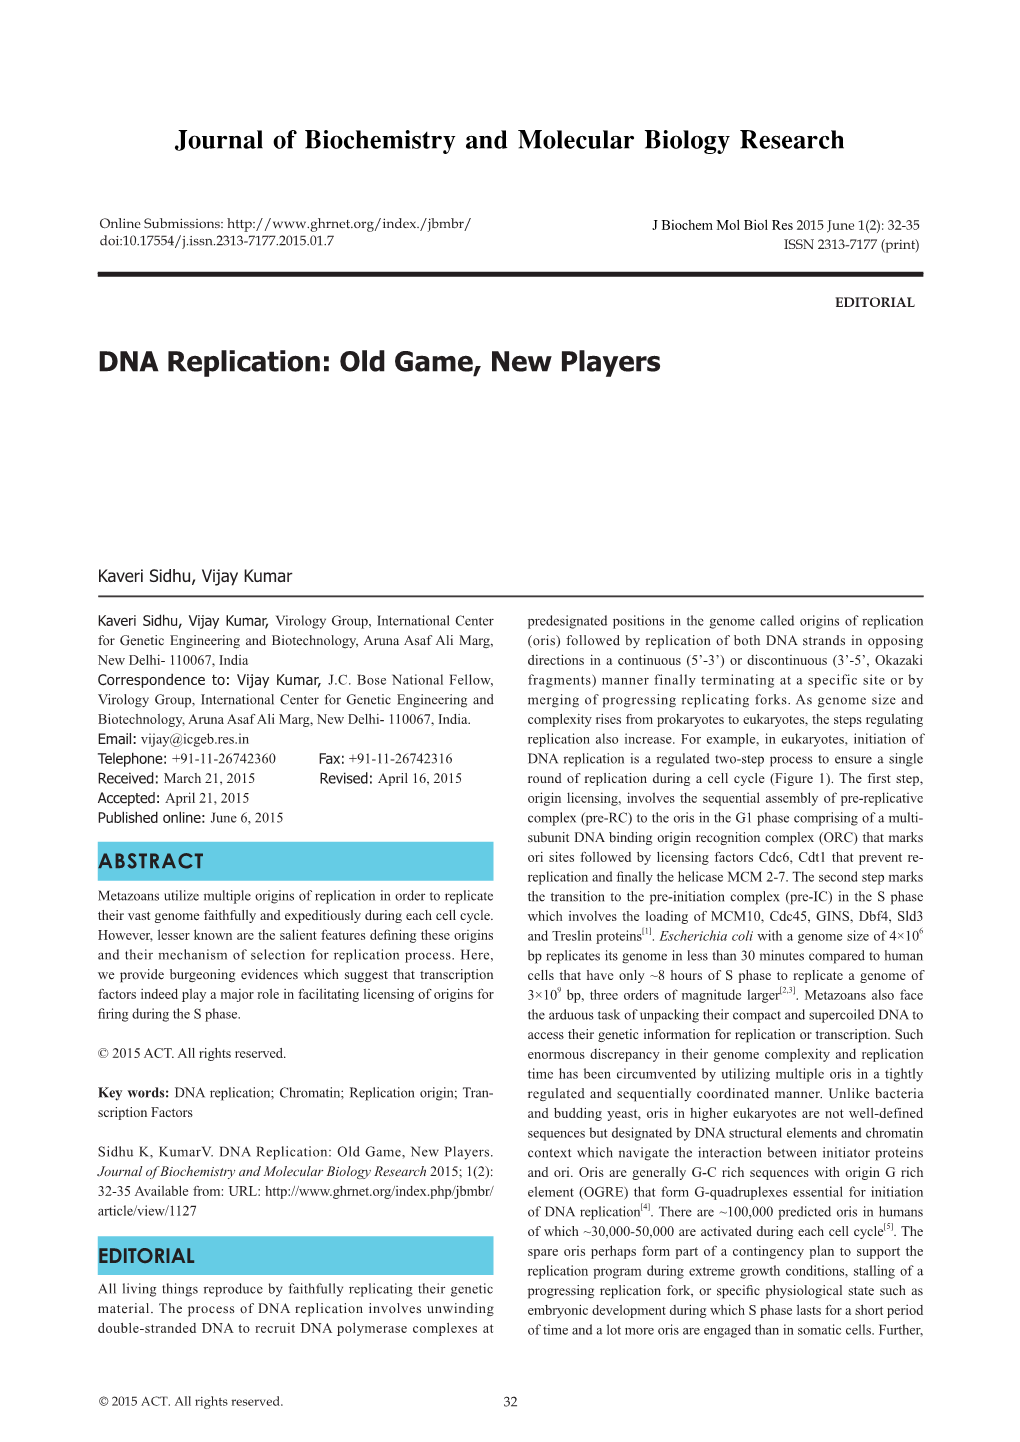 DNA Replication: Old Game, New Players